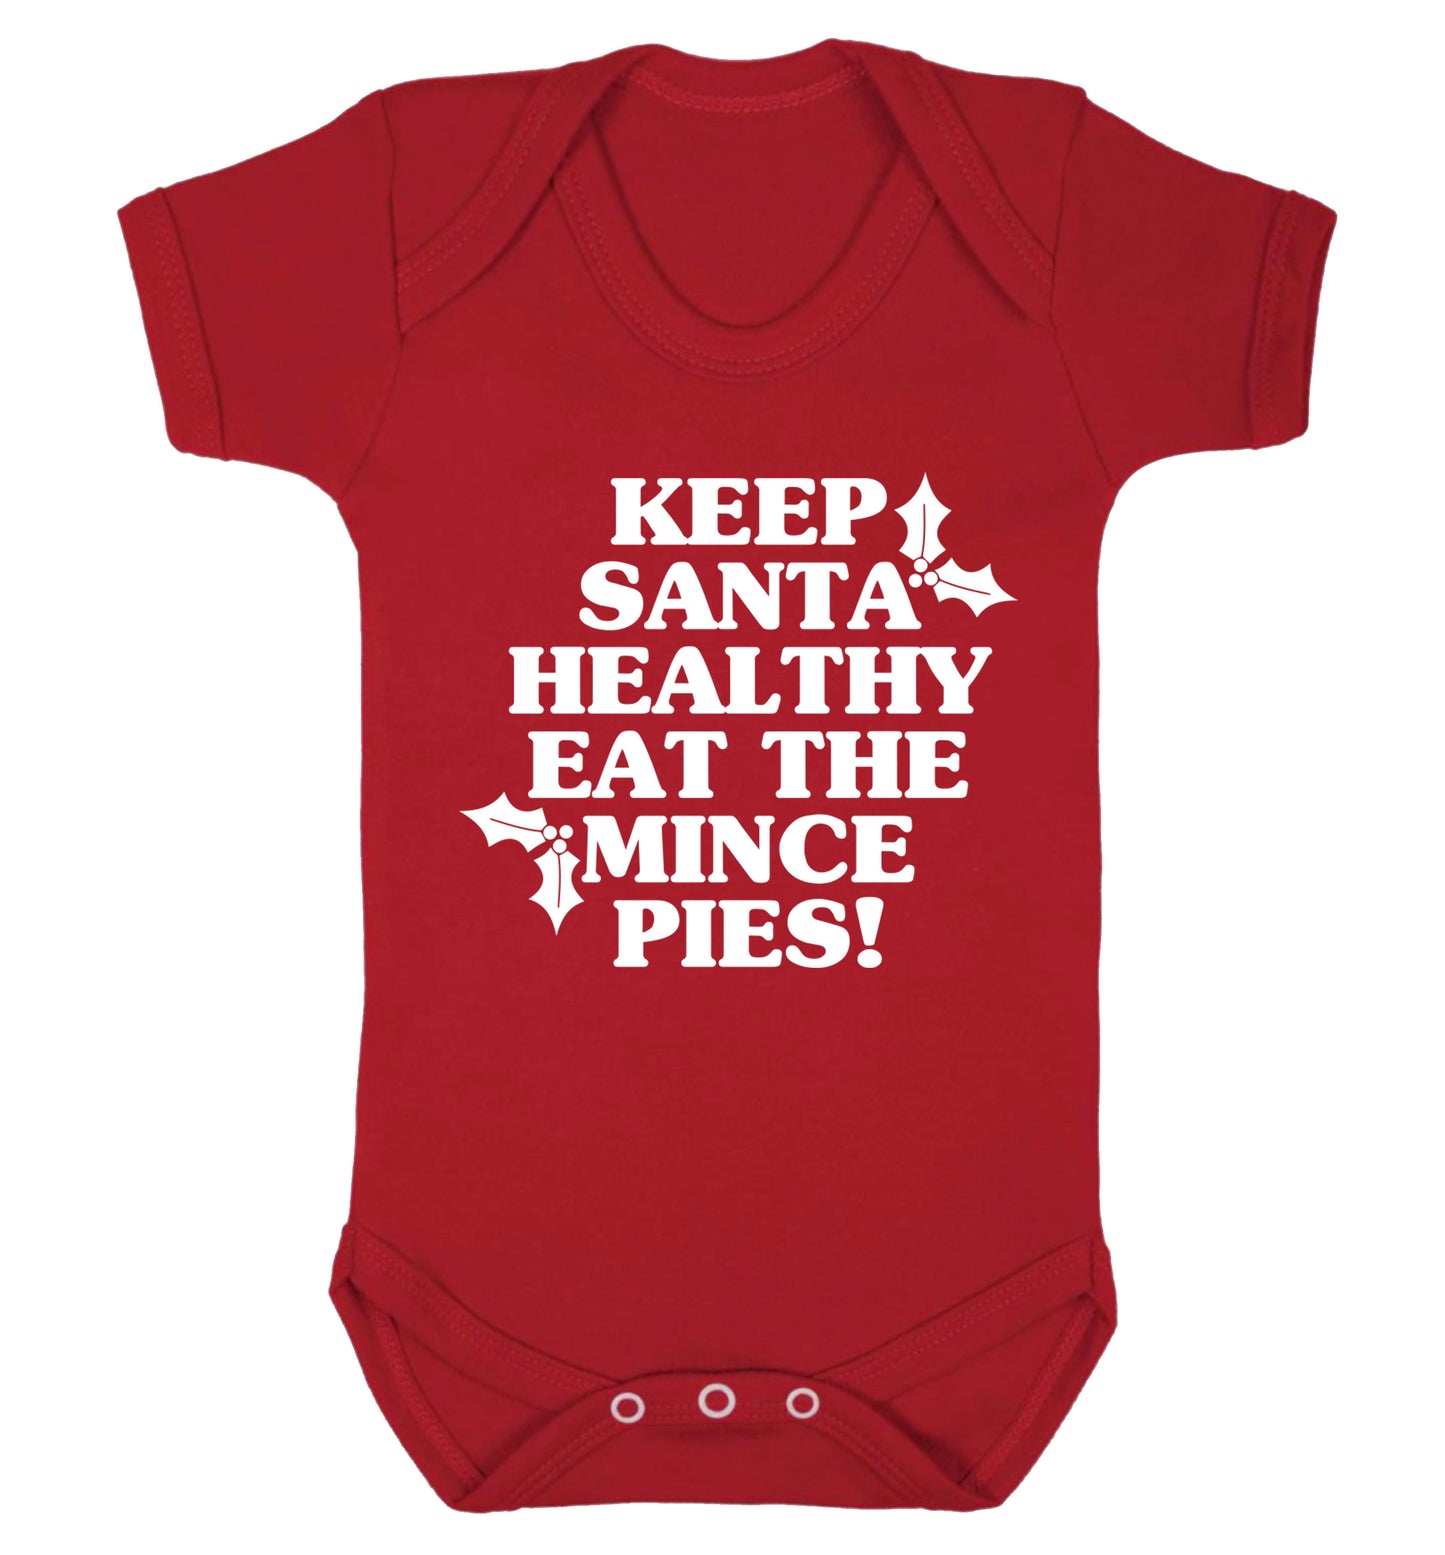 Keep santa healthy eat the mince pies Baby Vest red 18-24 months